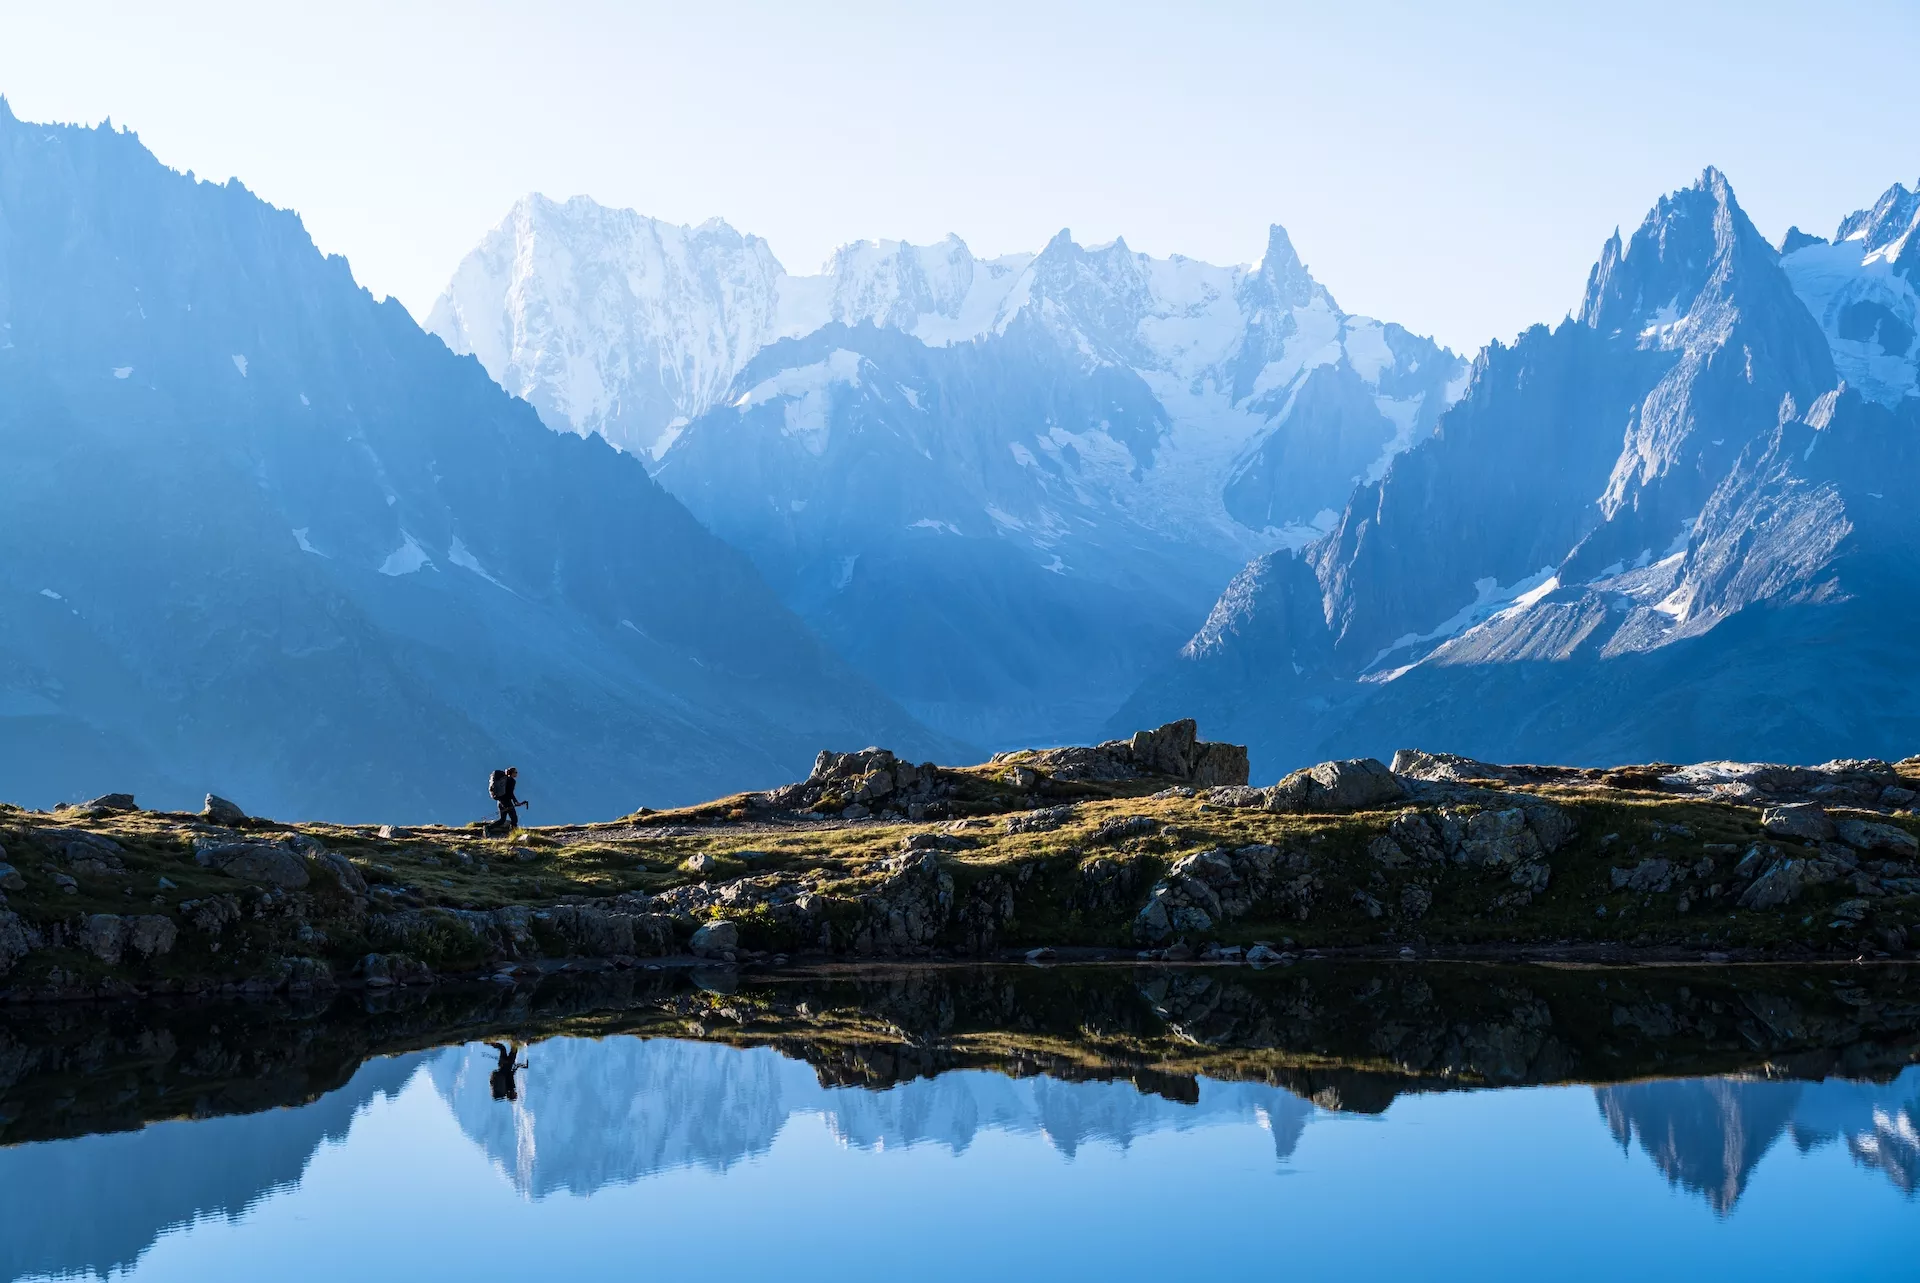 Lac des Cheserys with a view at the beautufil mountains of Chamonix